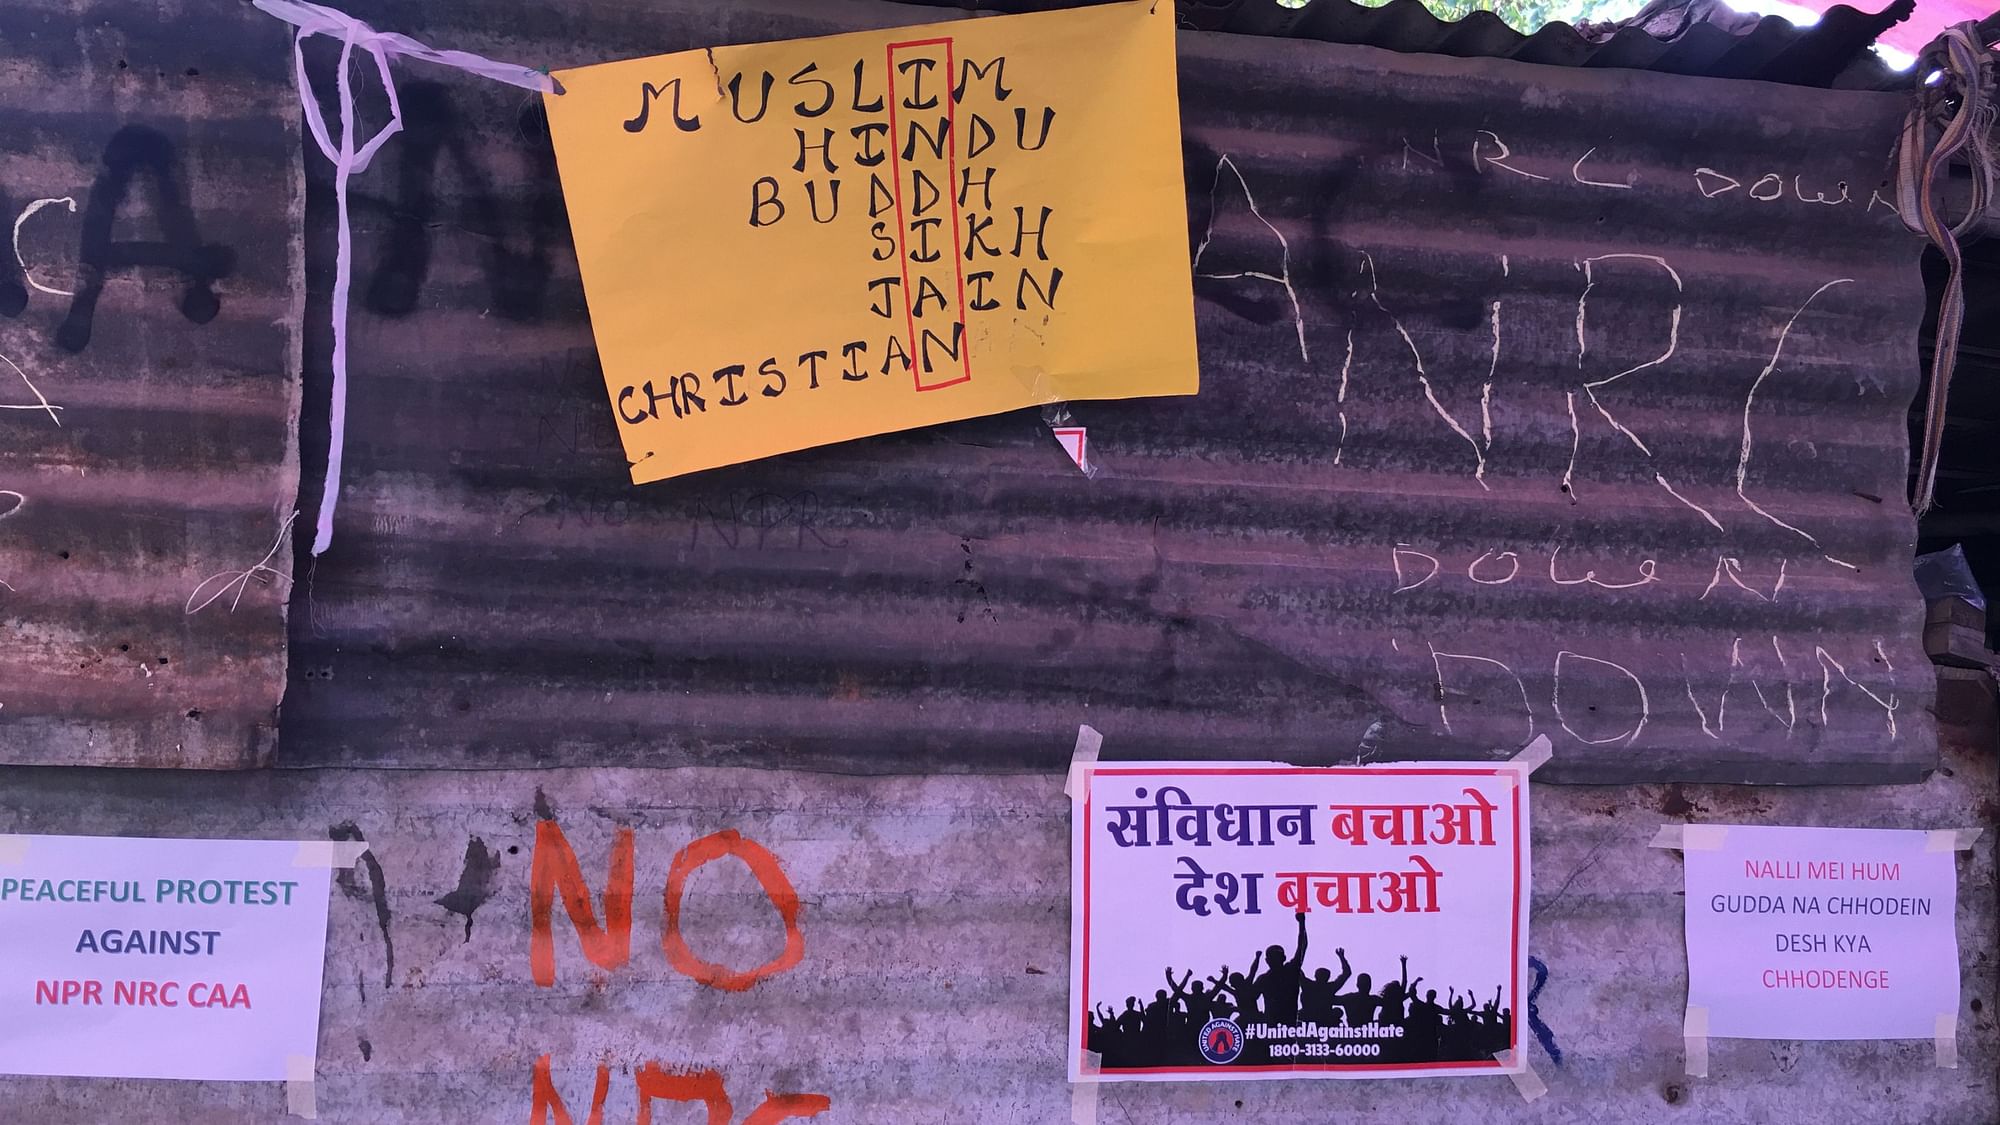 Anti-CAA and anti-NRC slogans painted on temporary sheds. Image used for representational purpose.